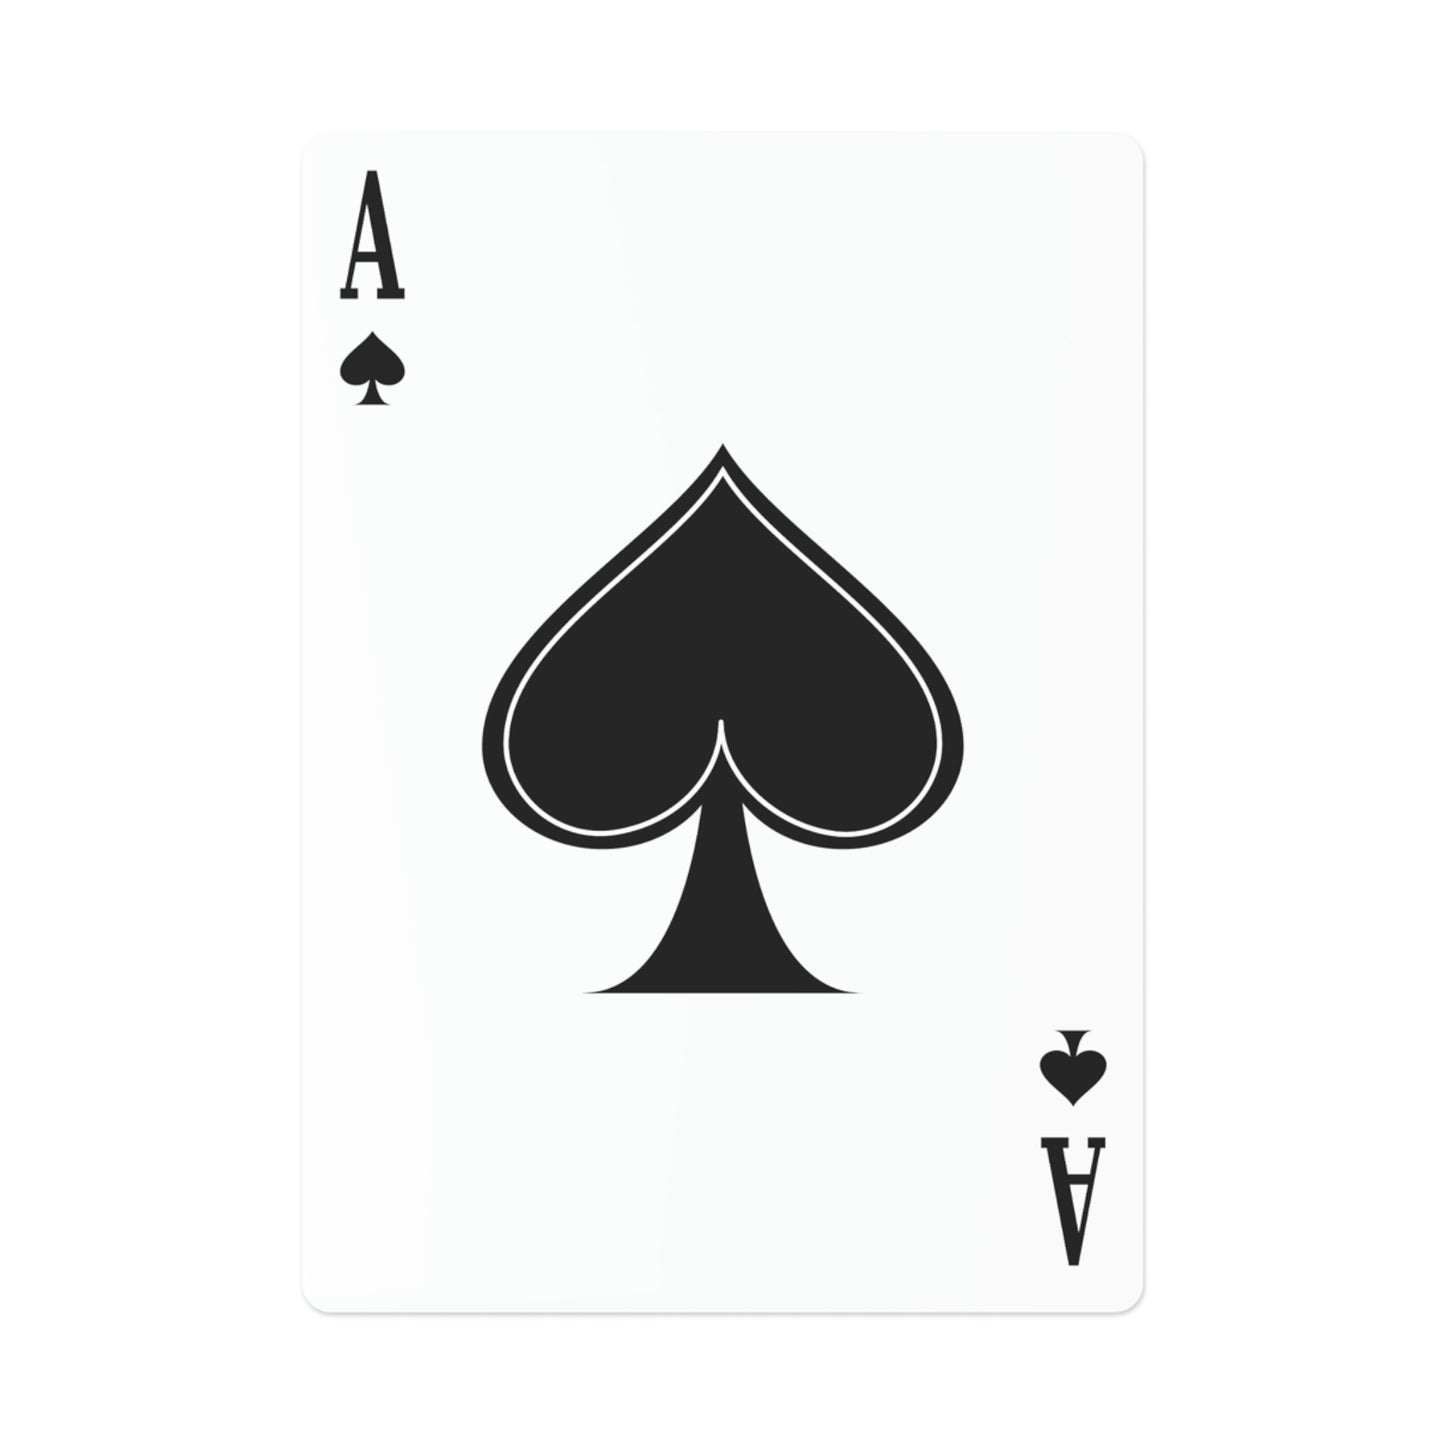 Saucy Jacky - Playing Cards